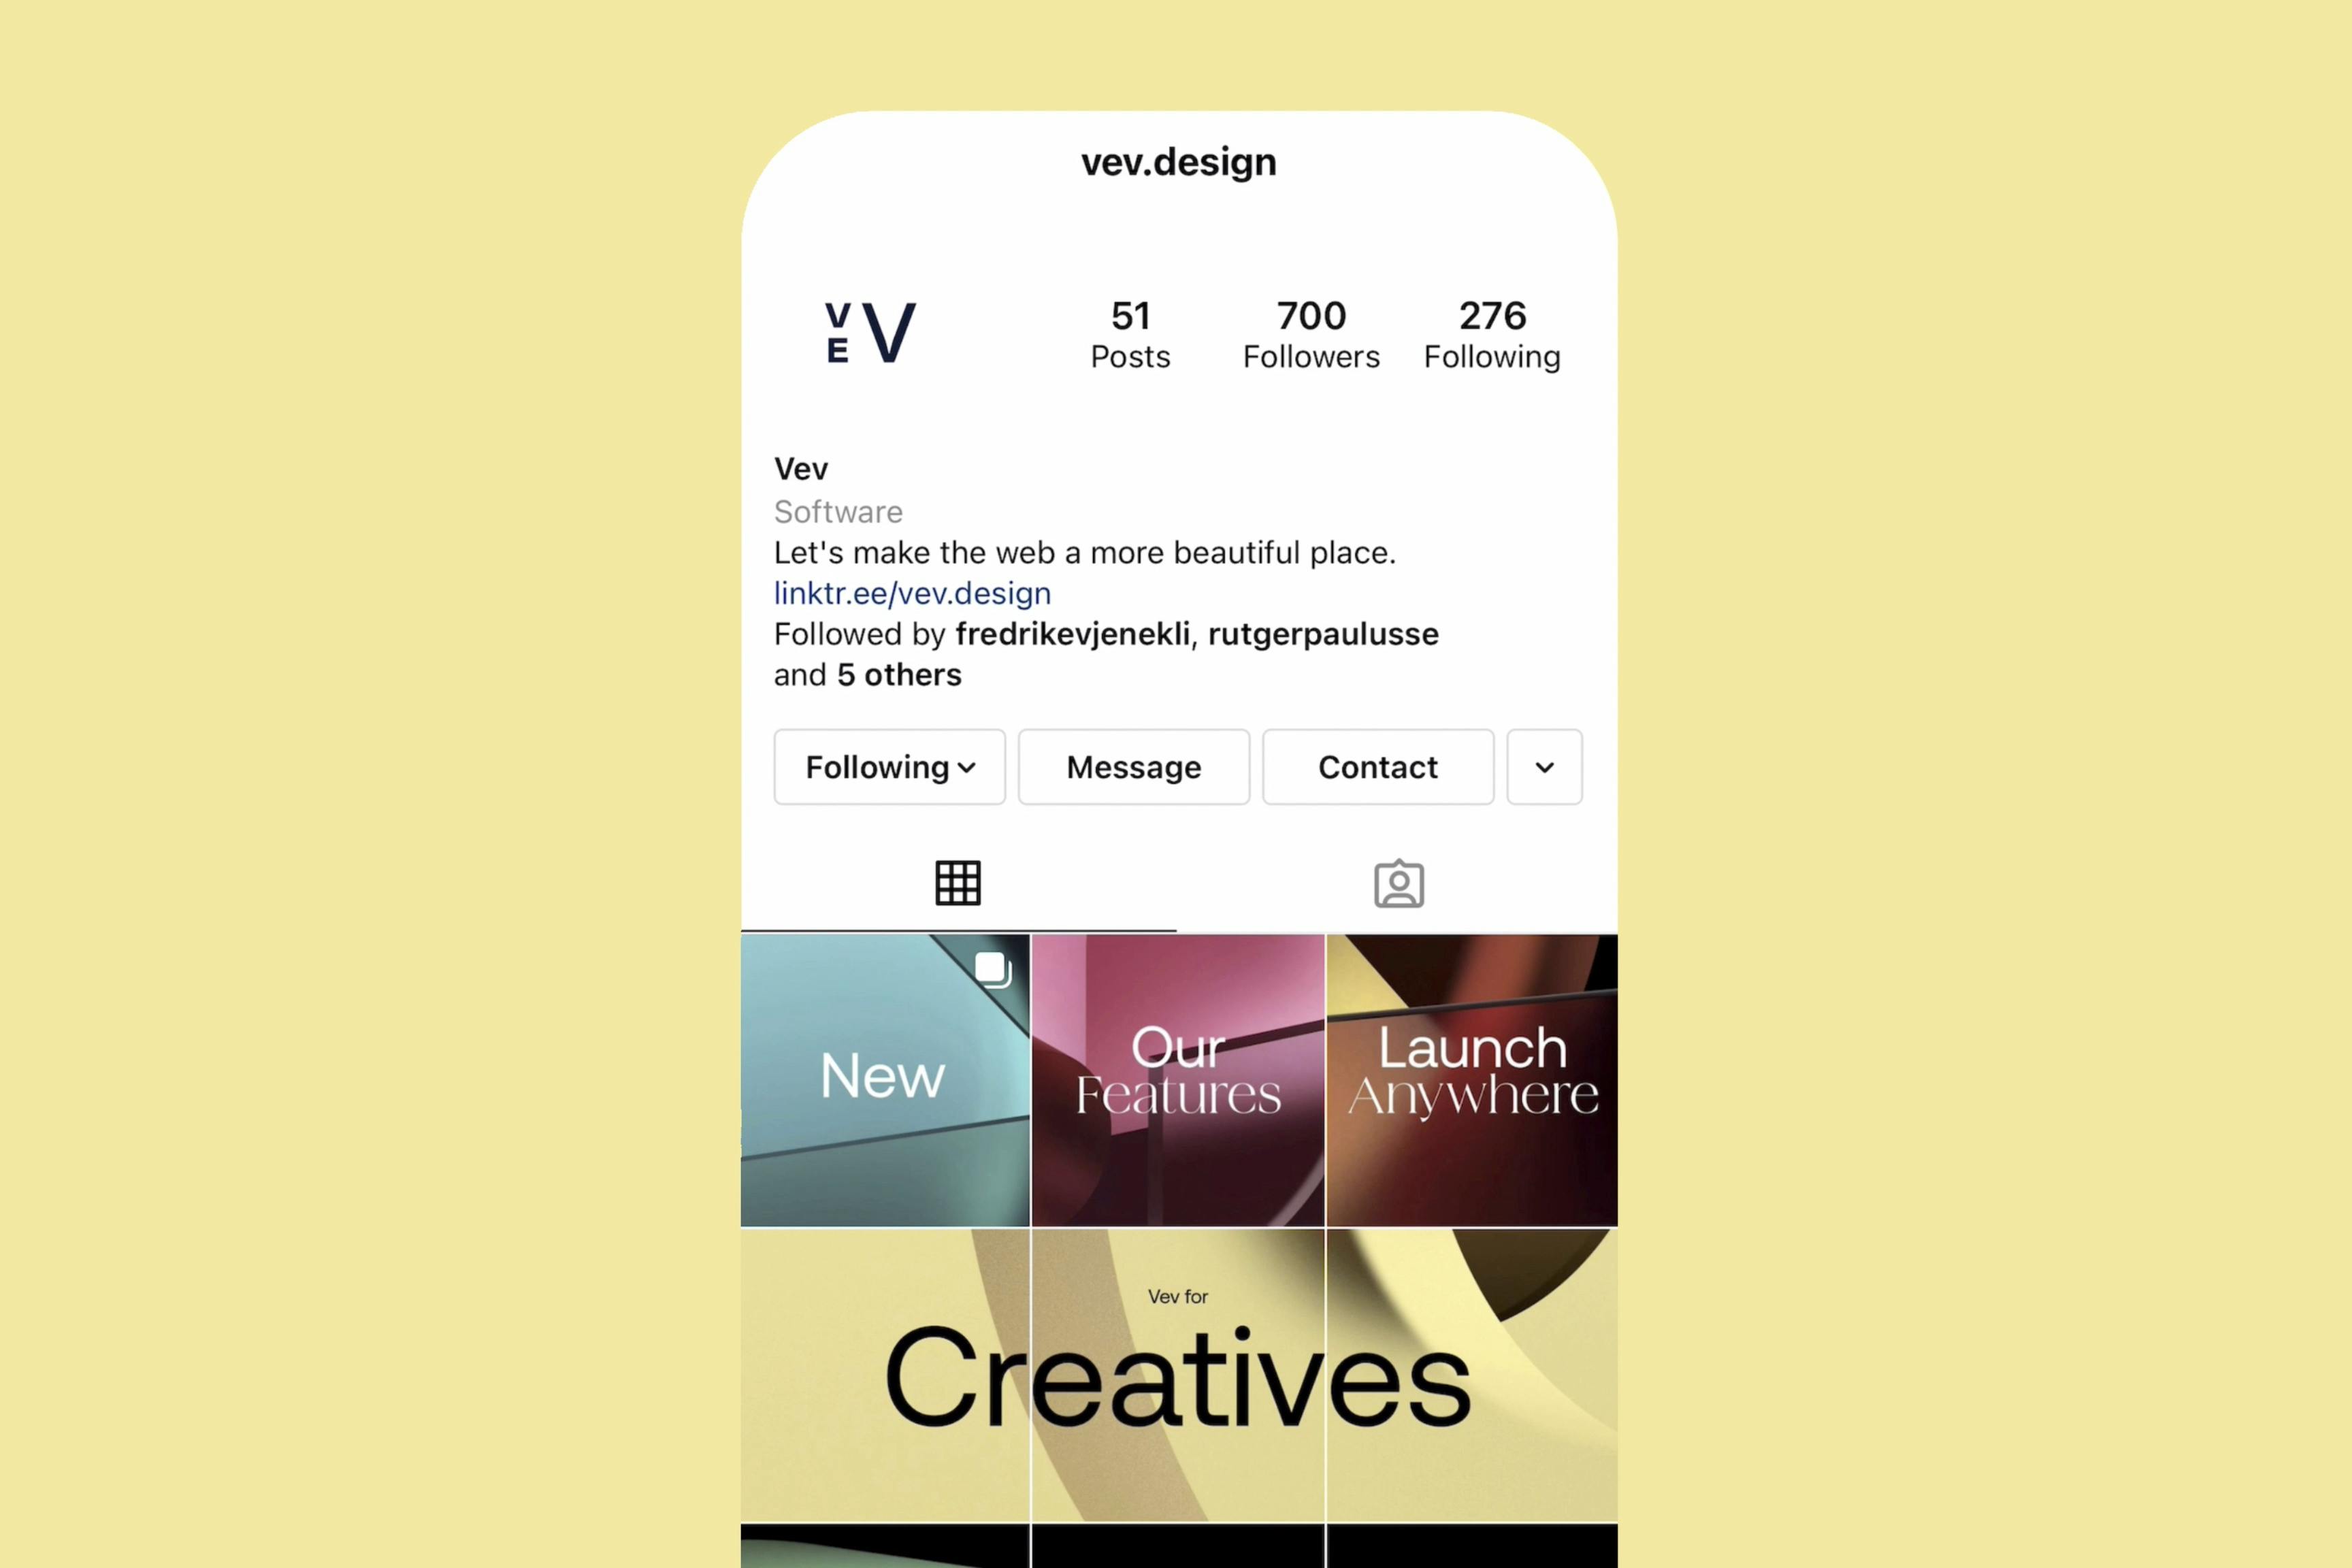 Screen recording of Vev's instagram account featuring the new branding.